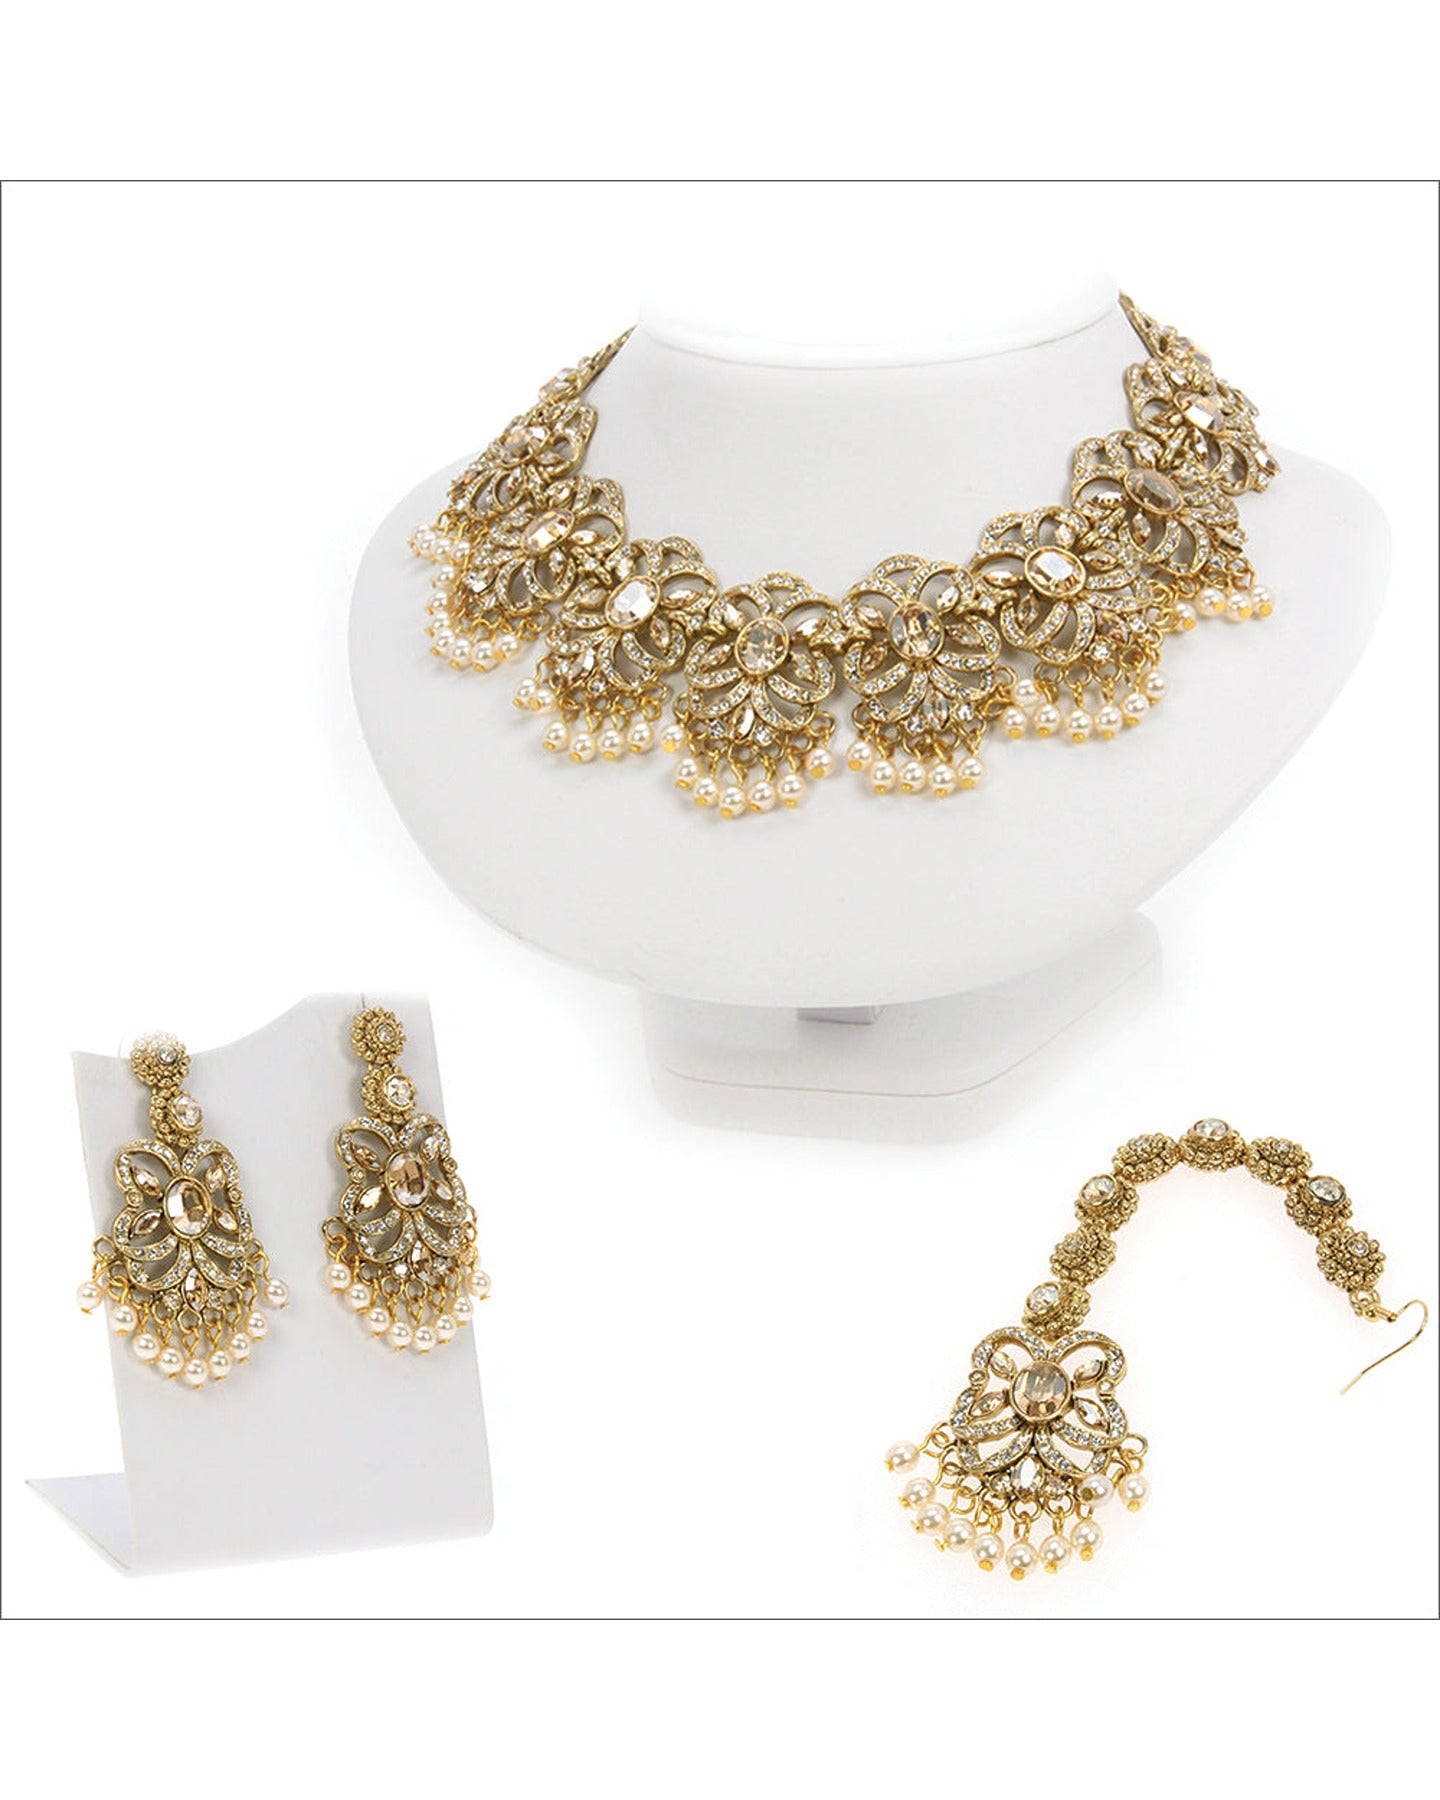 Antique Gold Jewelry with Crystal Golden Shadow and Cream Pearl Accents